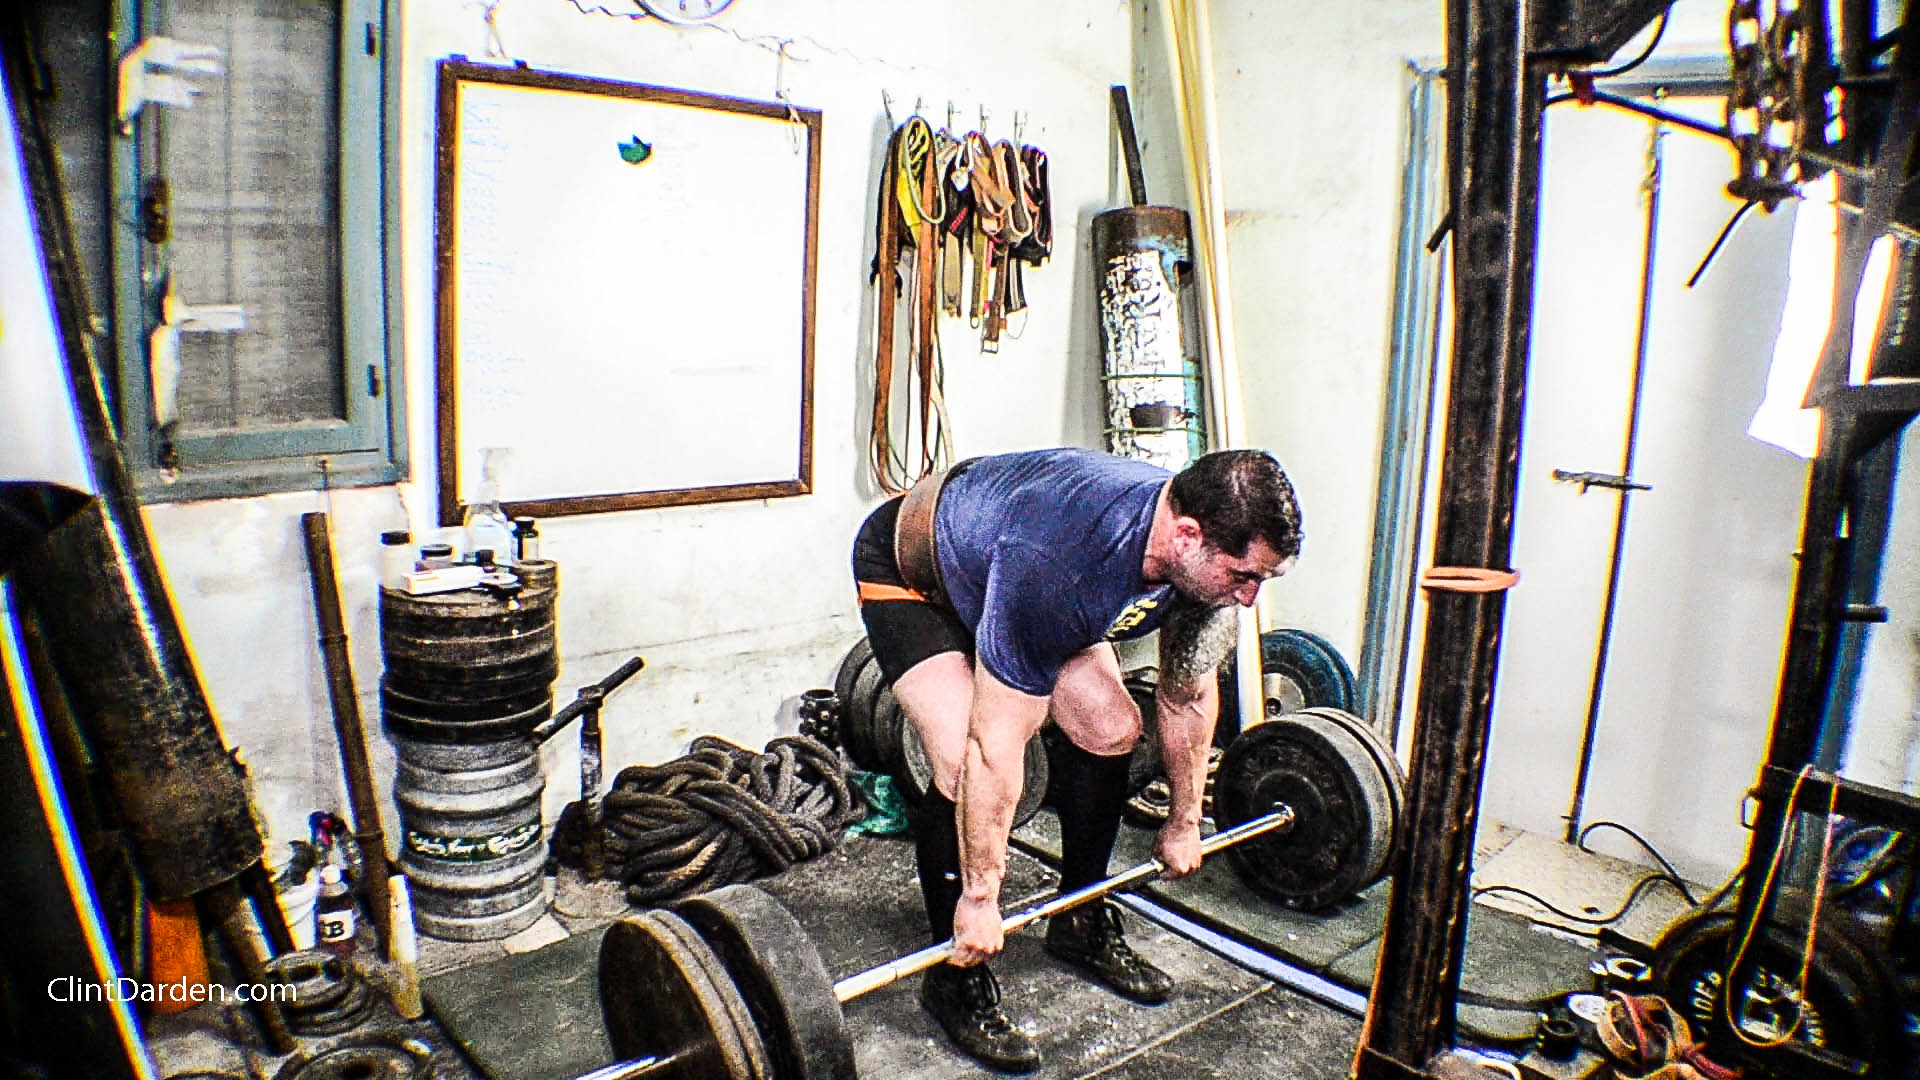 Can't Deadlift From Pain? Try These!